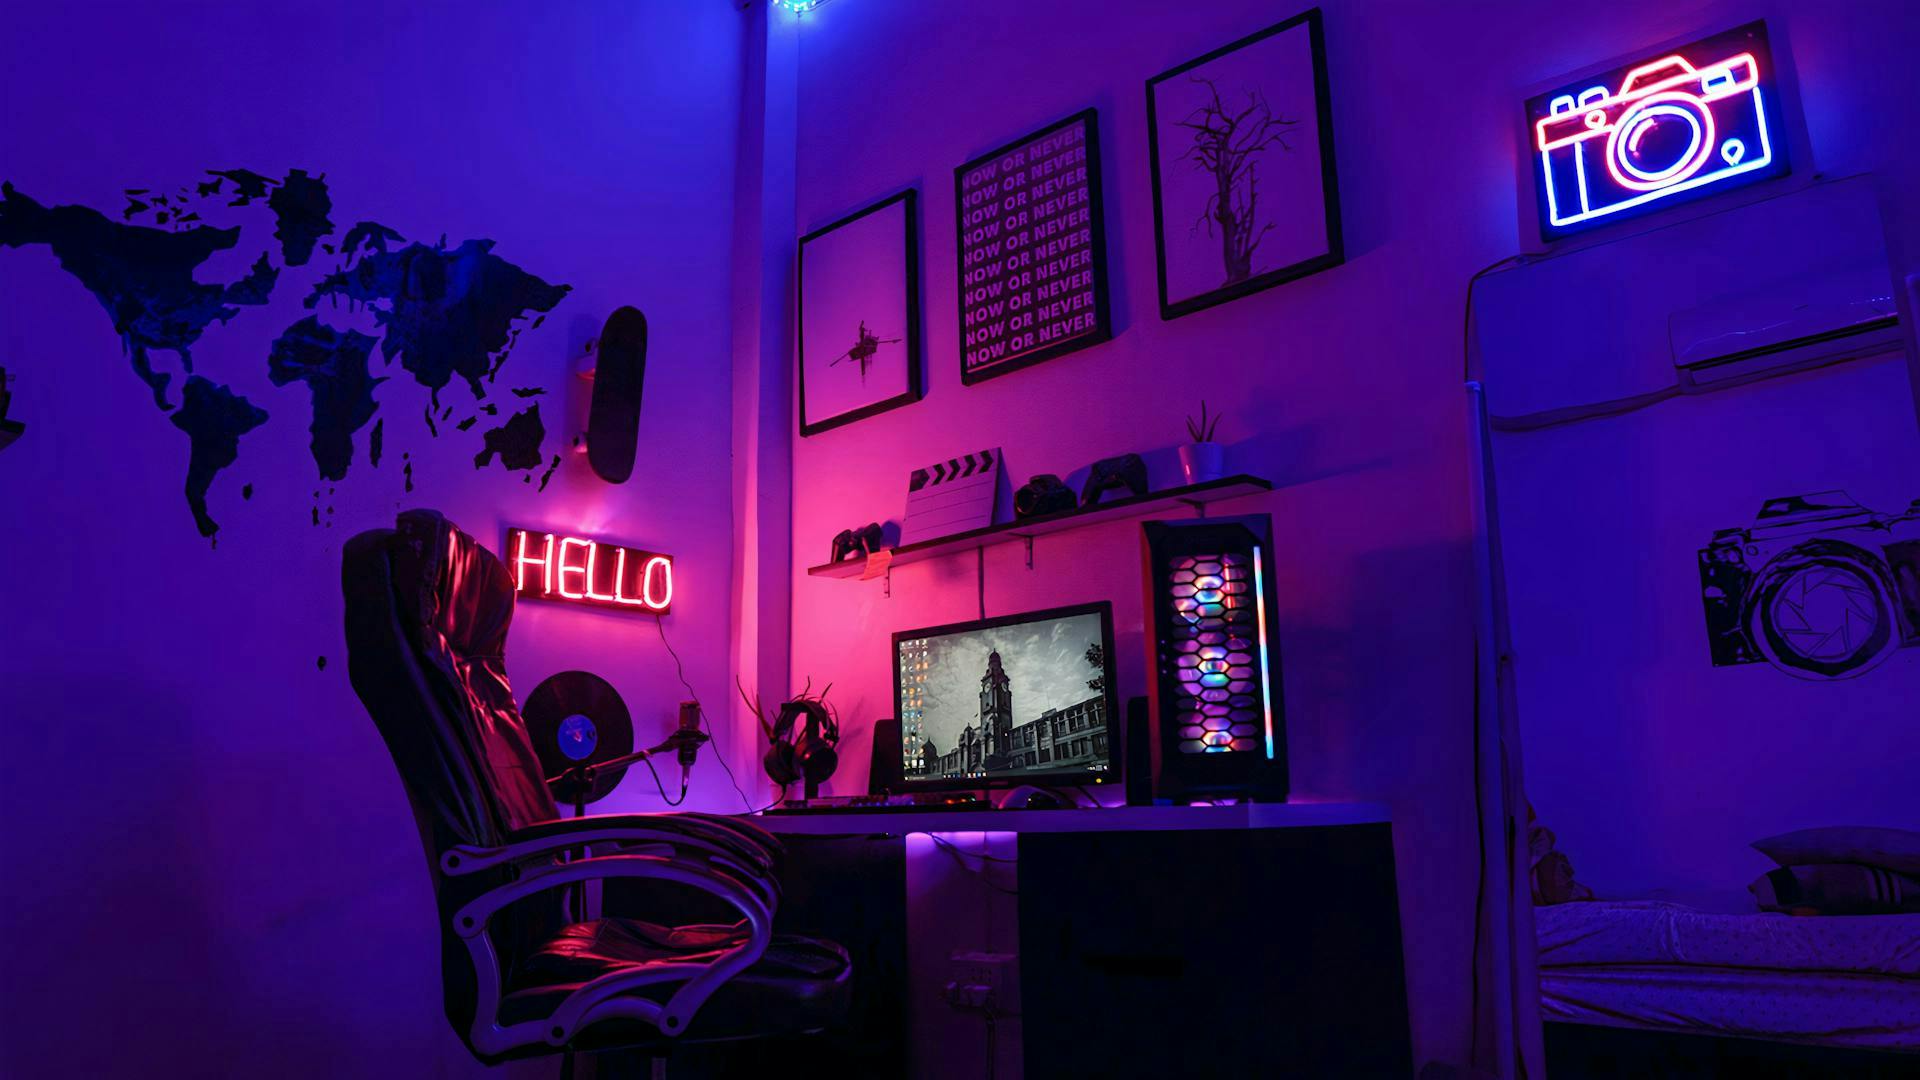 In an elaborately decorated gaming setup with blue and purple illuminated LED and gaming lights, an LED gaming PC stands amidst lots of gaming decorations